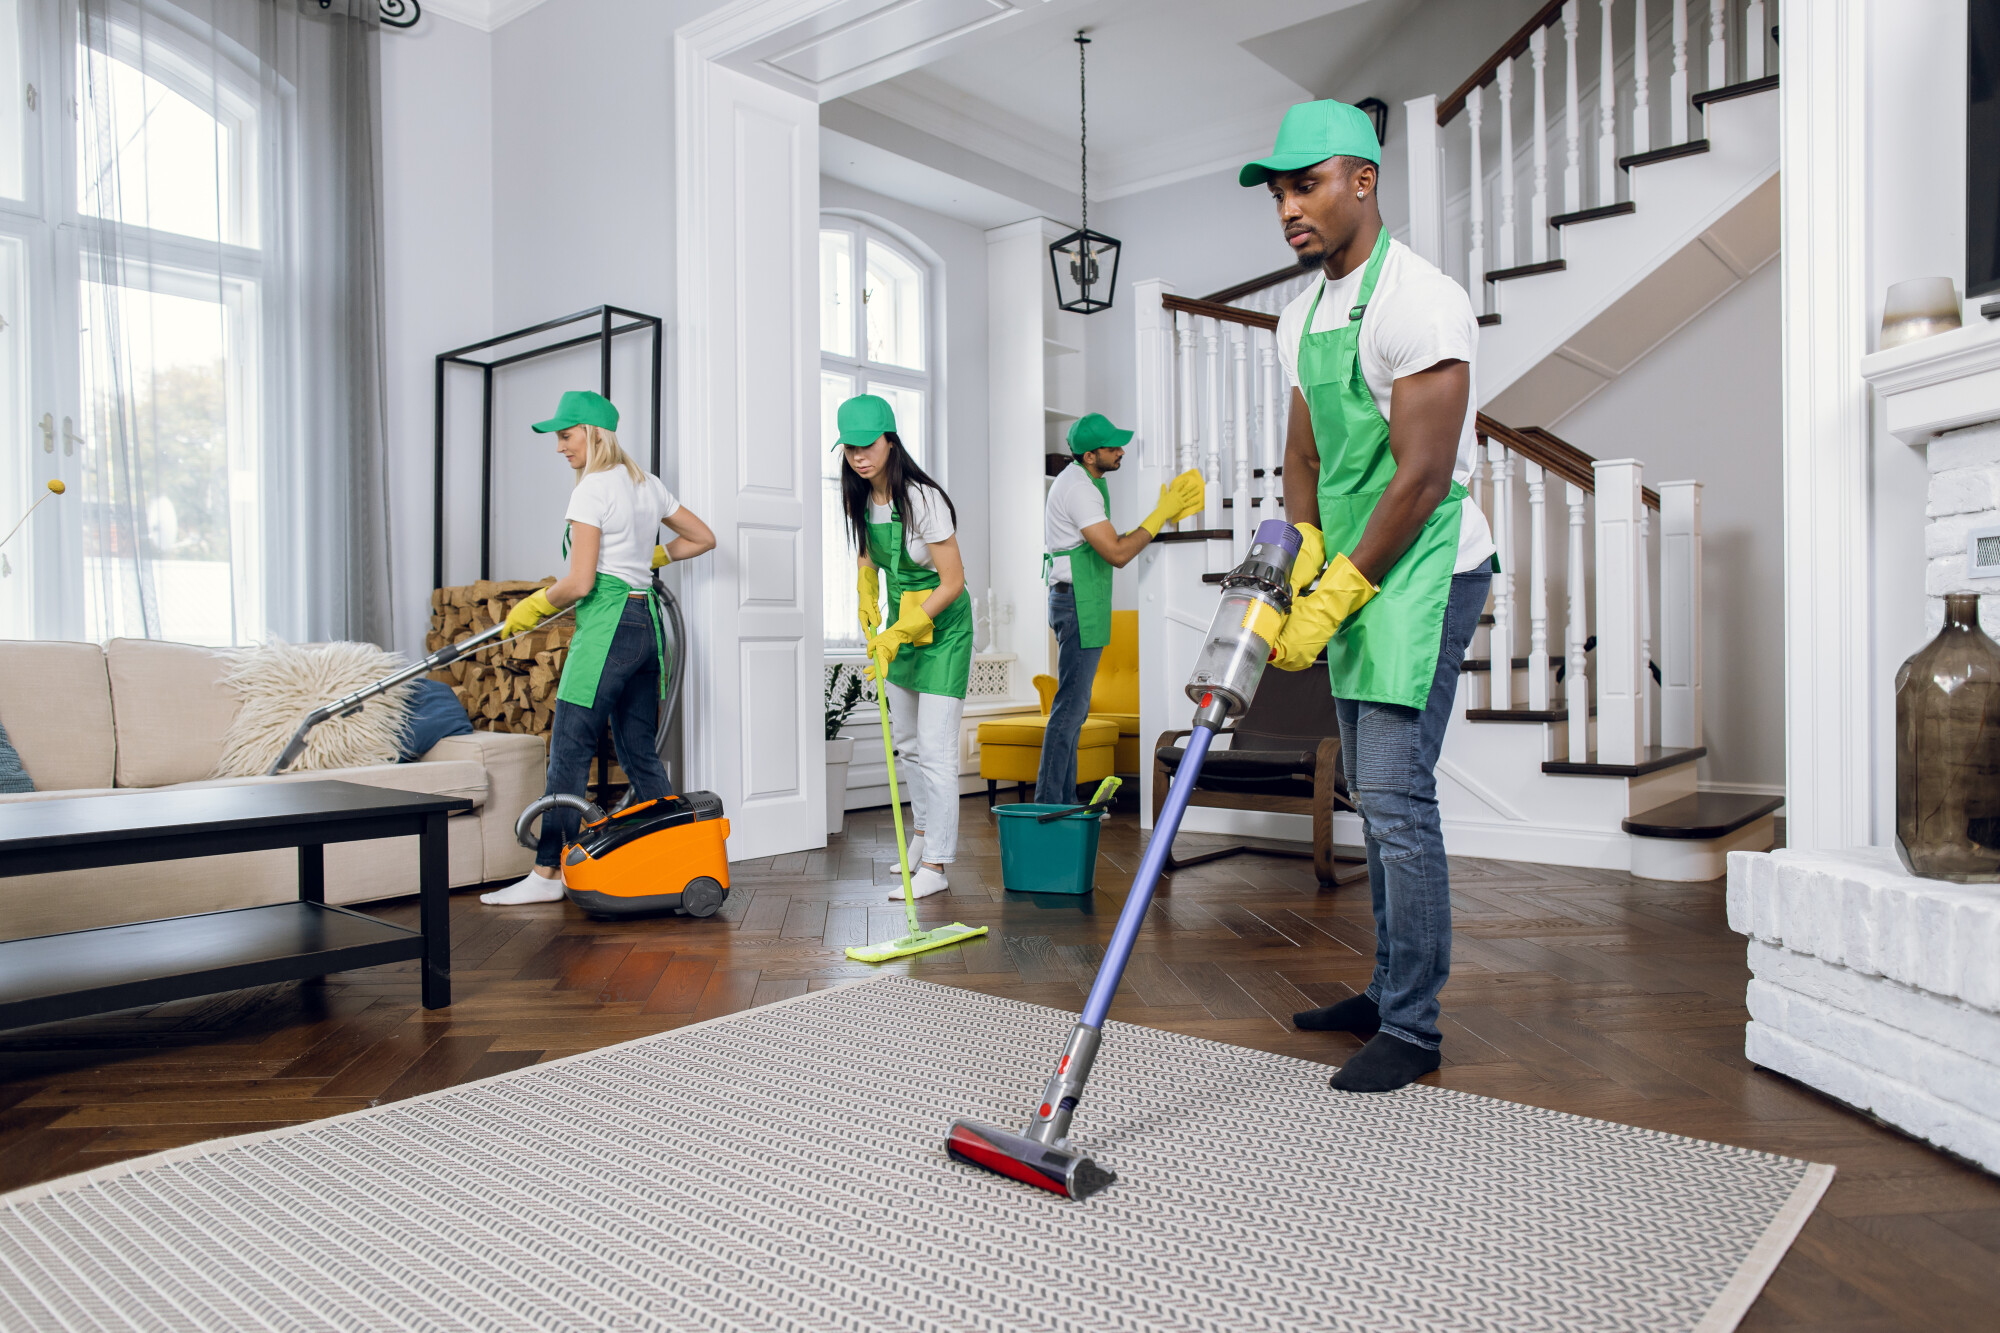 Want to know why you should hire someone to clean your home? Read this to discover the best reasons to hire professional house cleaners!